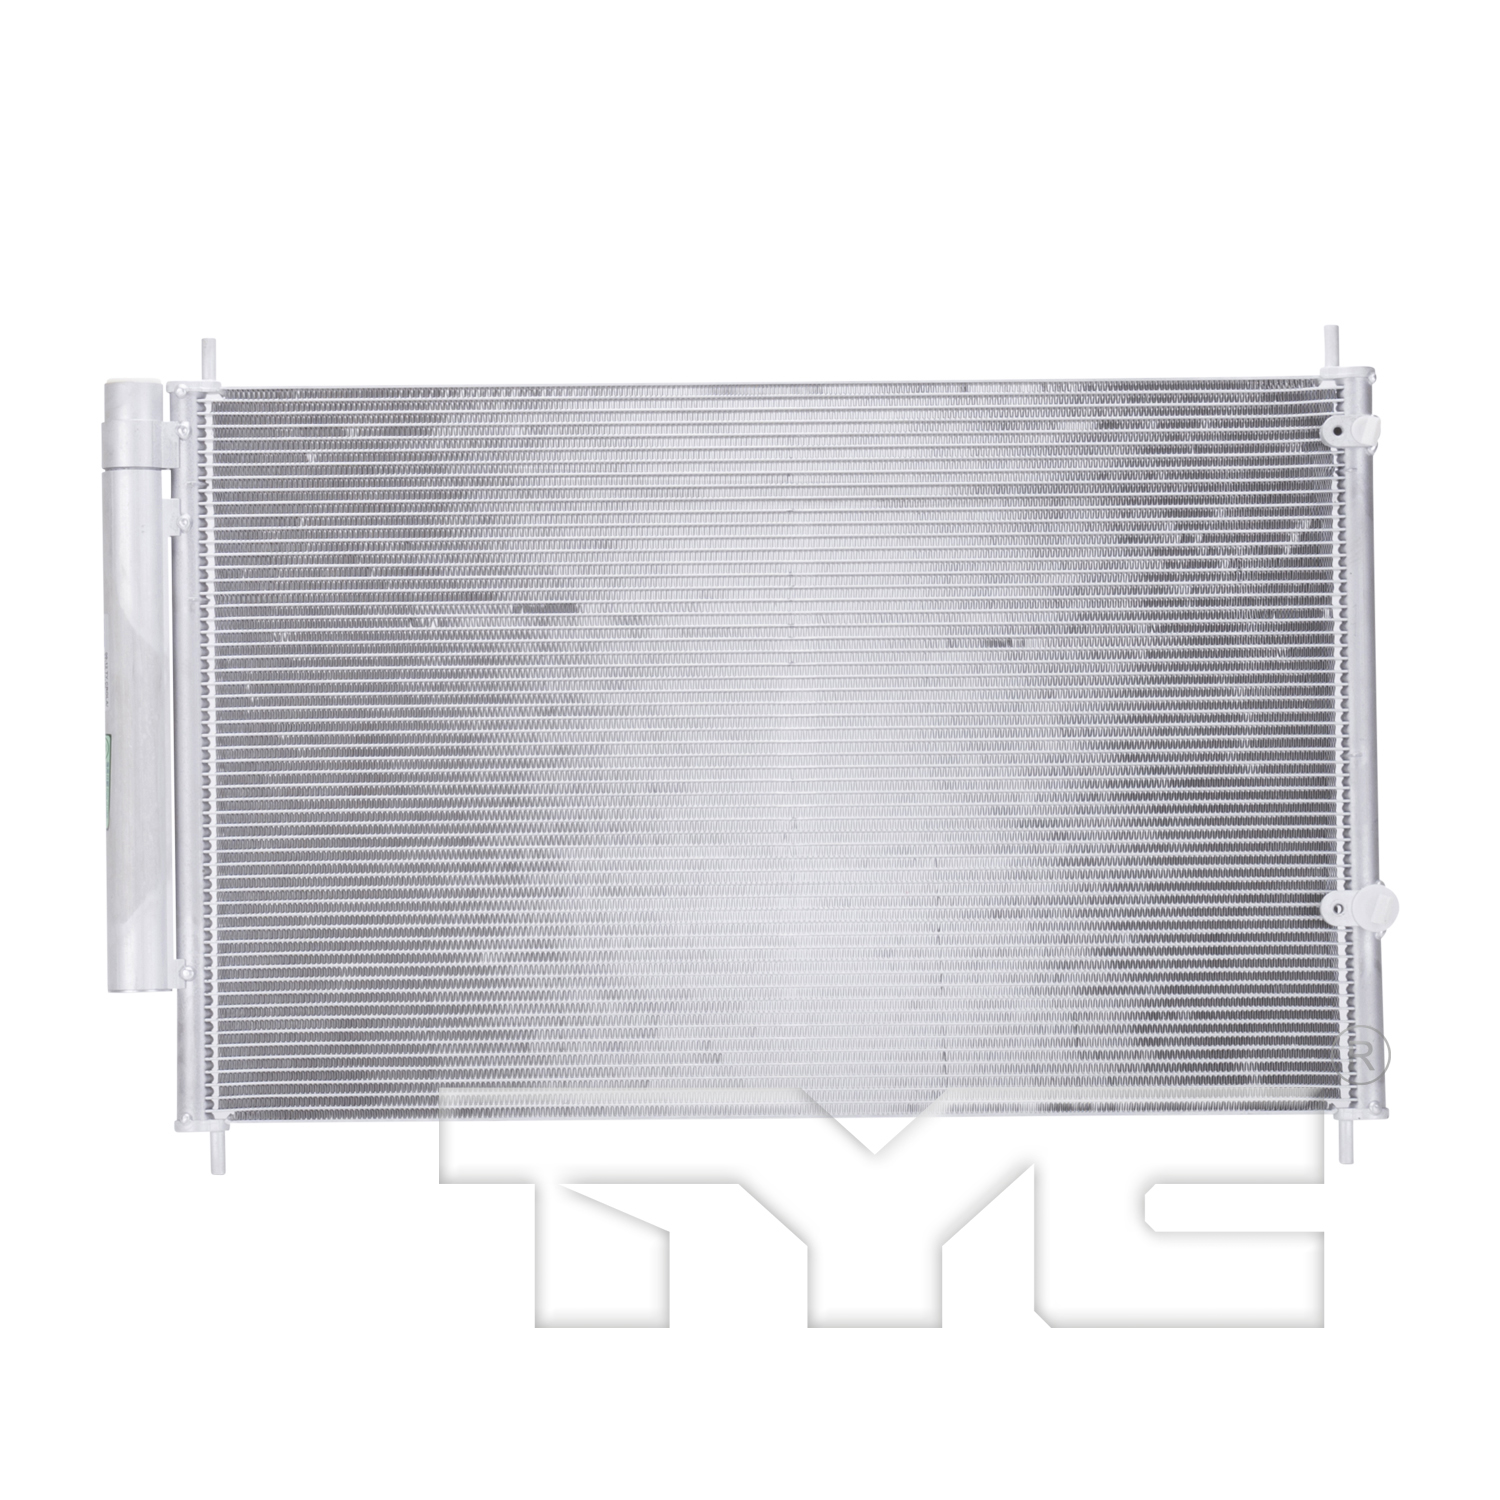 Aftermarket AC CONDENSERS for TOYOTA - COROLLA, COROLLA,09-13,Air conditioning condenser